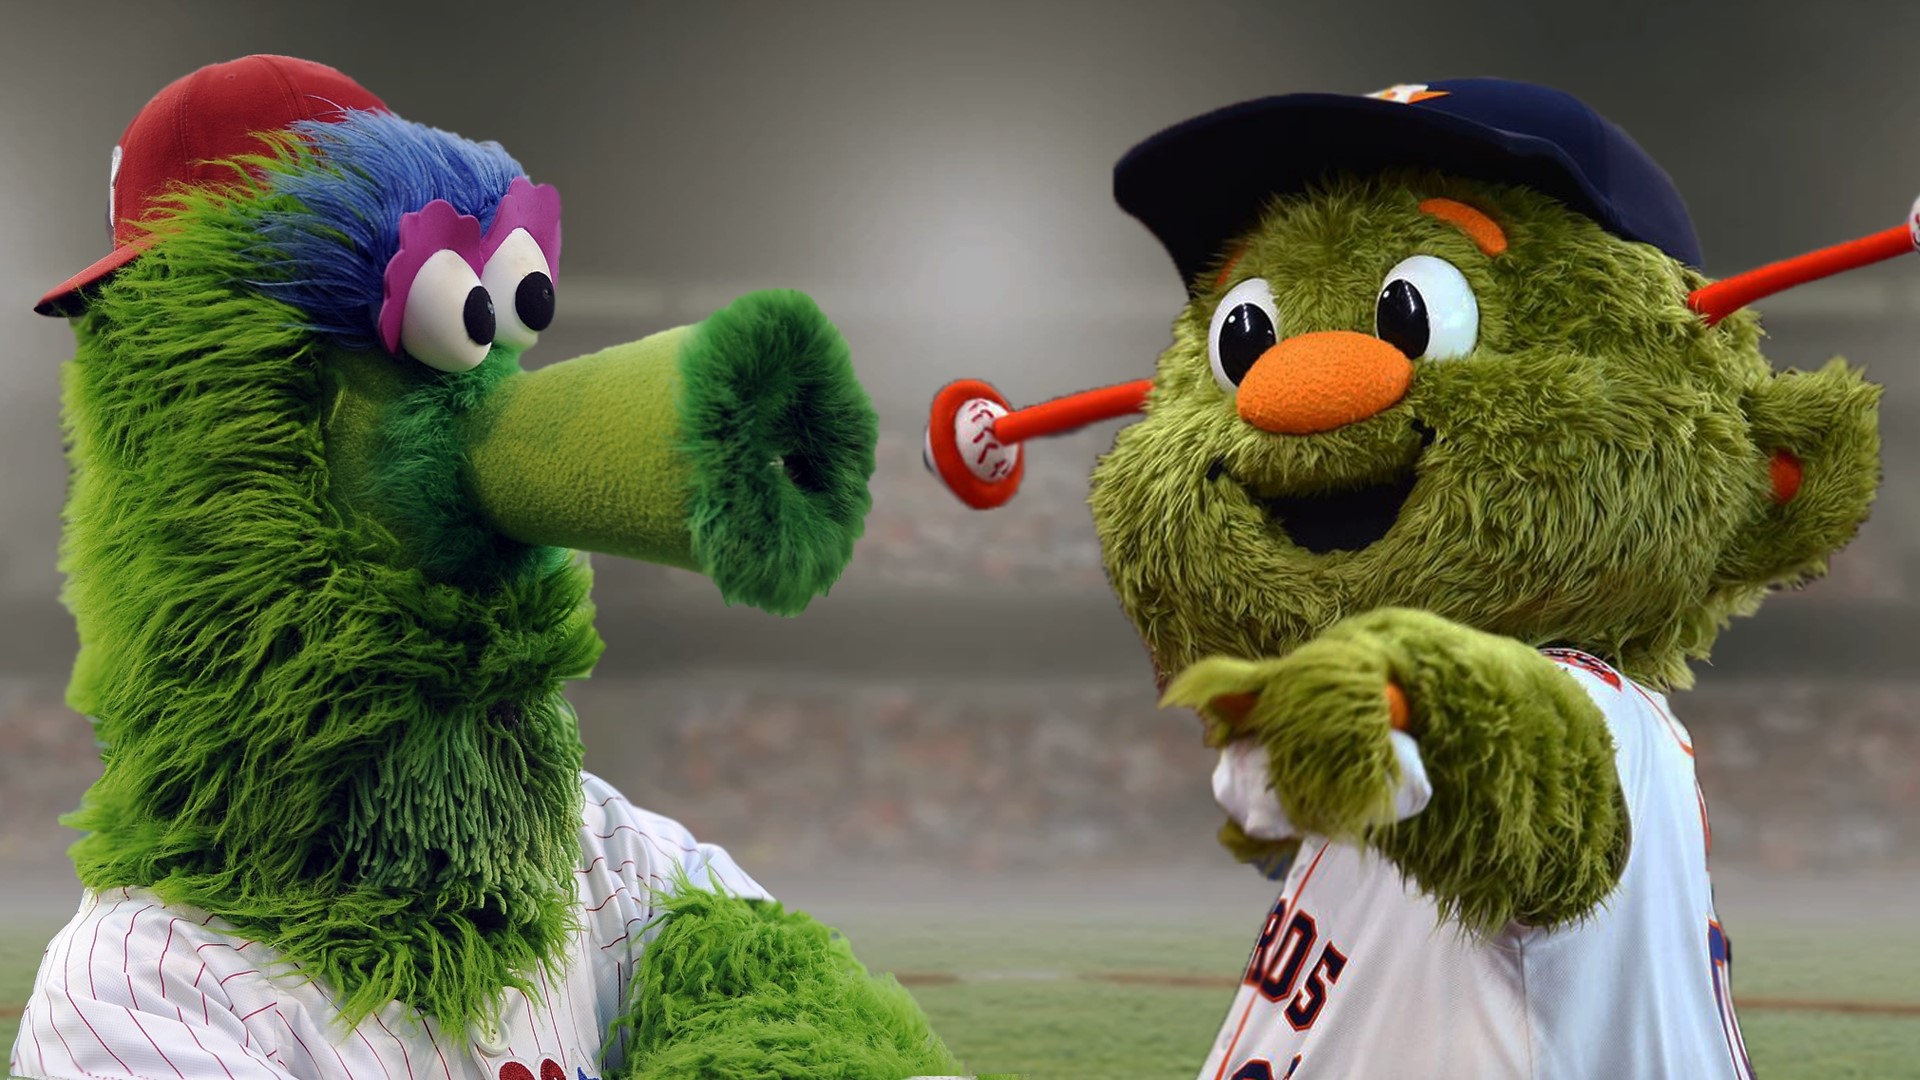 Orbit versus Phillie Phanatic, they are two of the best-known mascots in baseball.